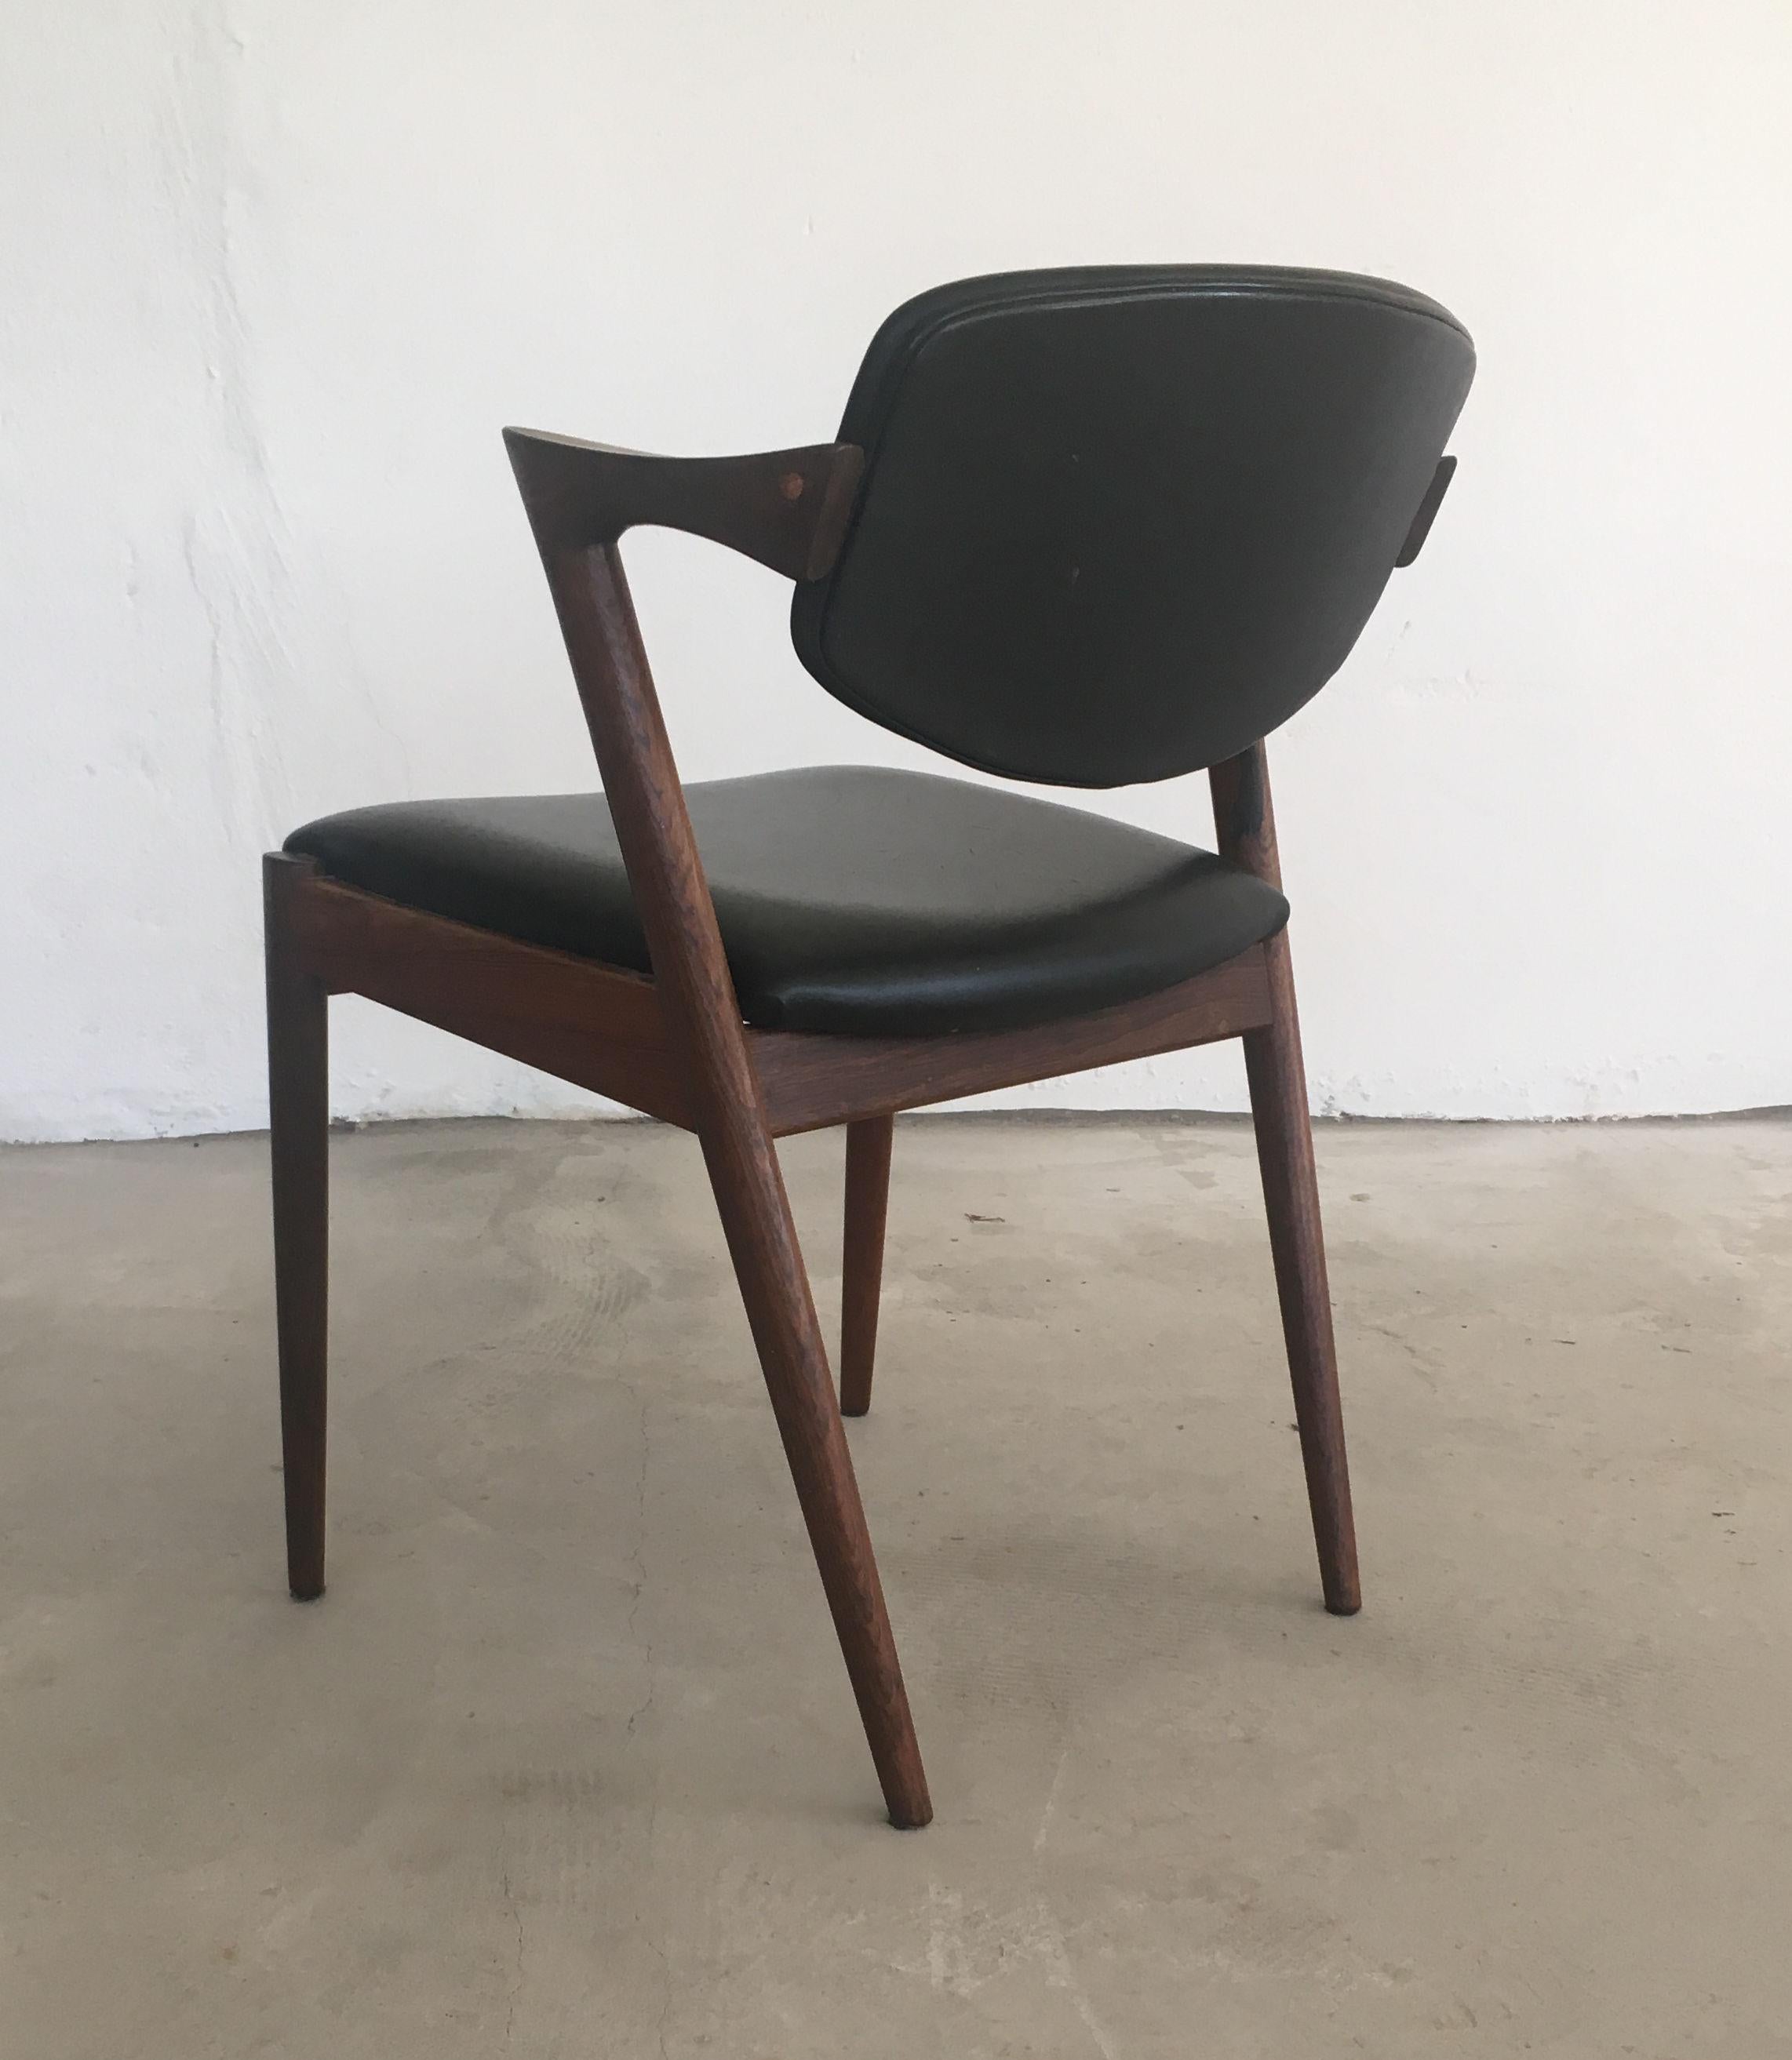 Danish 1960s Kai Kristiansen Fully Restored and Reupholstered Rosewood Dining Chairs For Sale